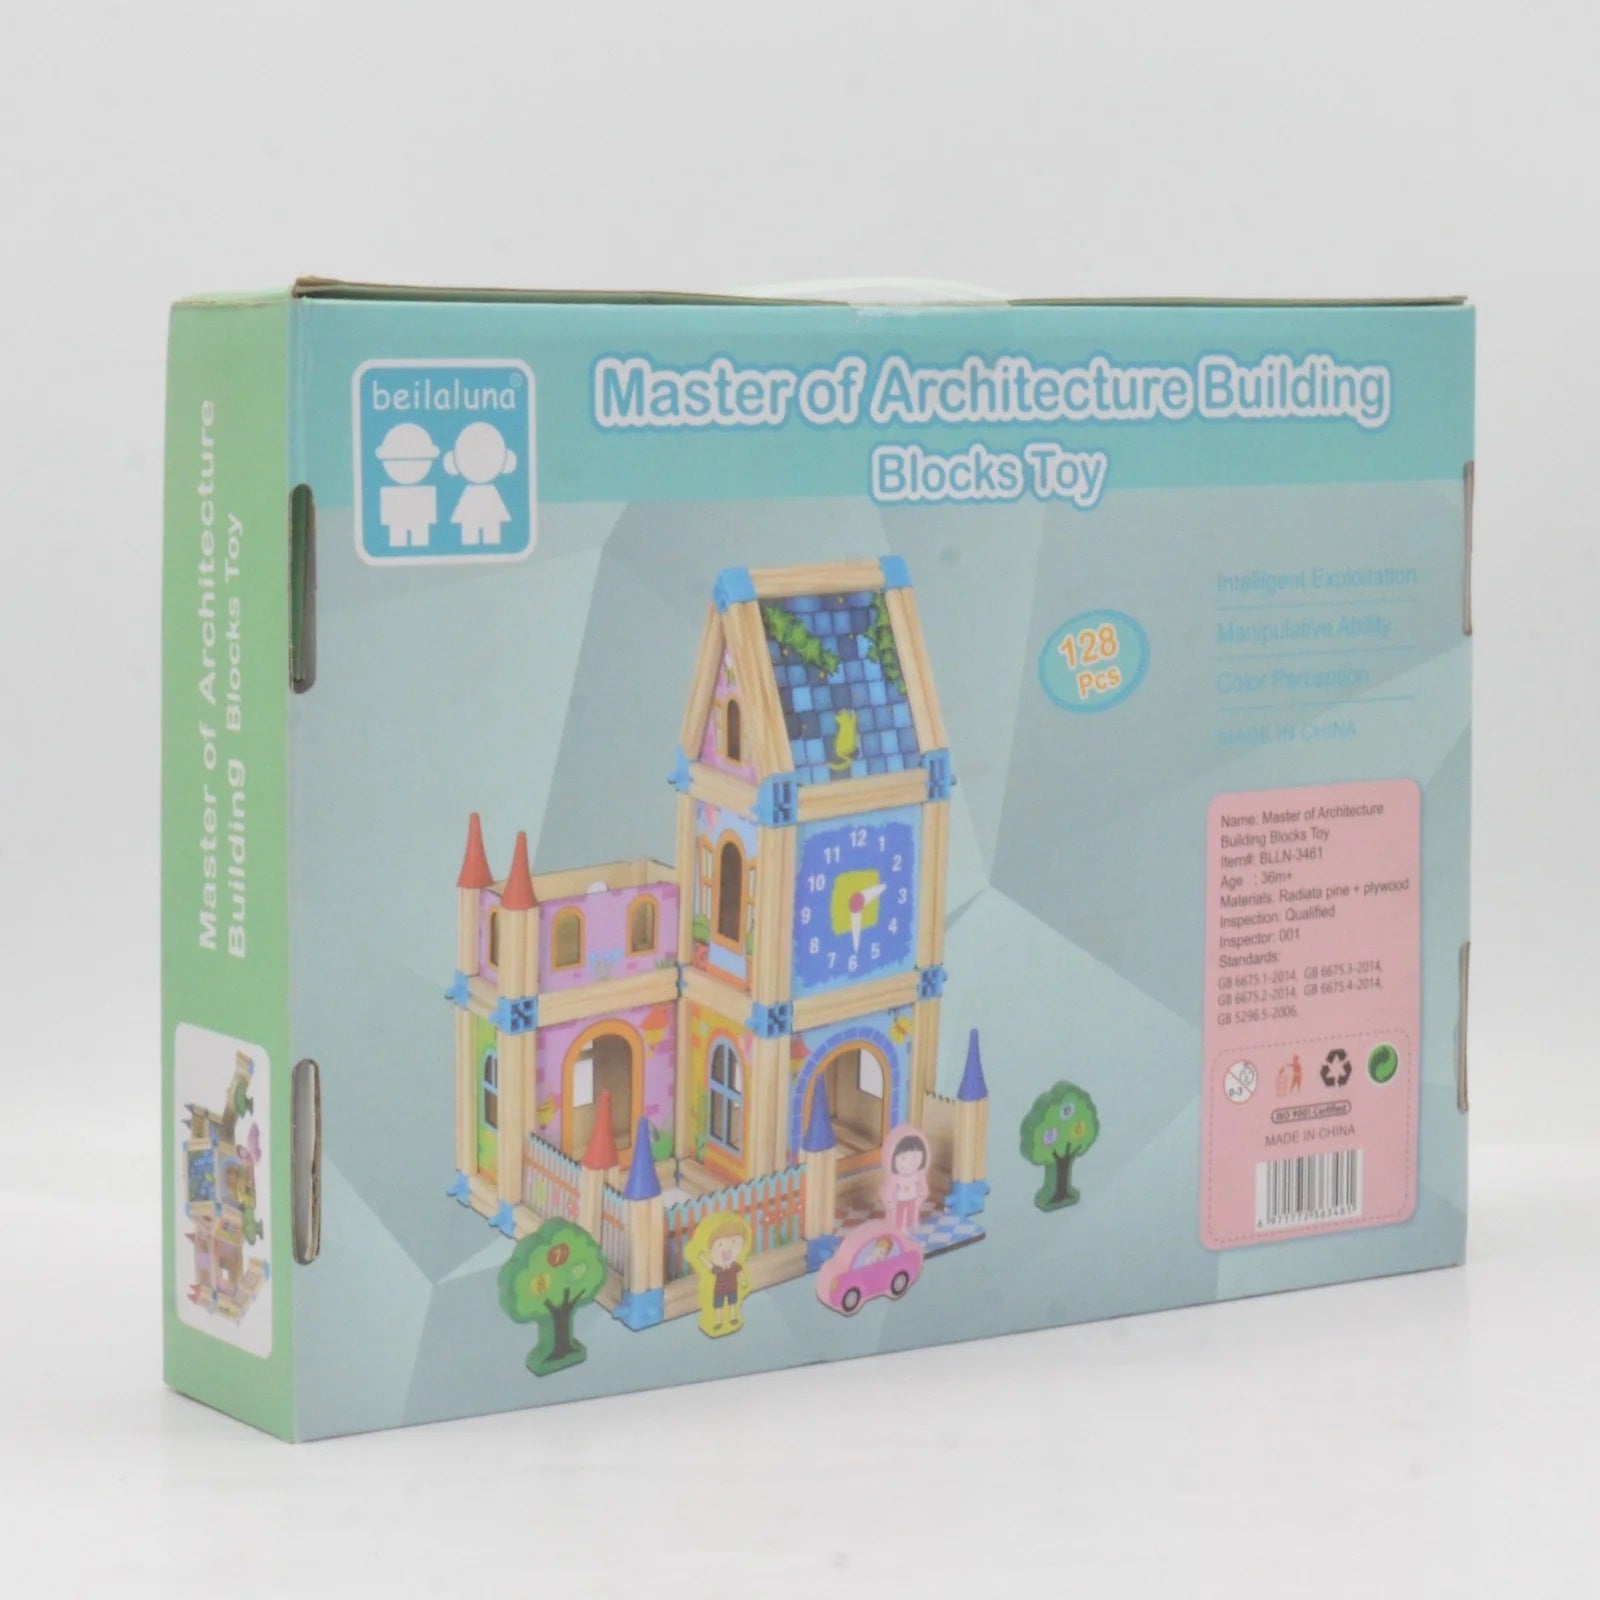 Master of Architecture Building Blocks Toy